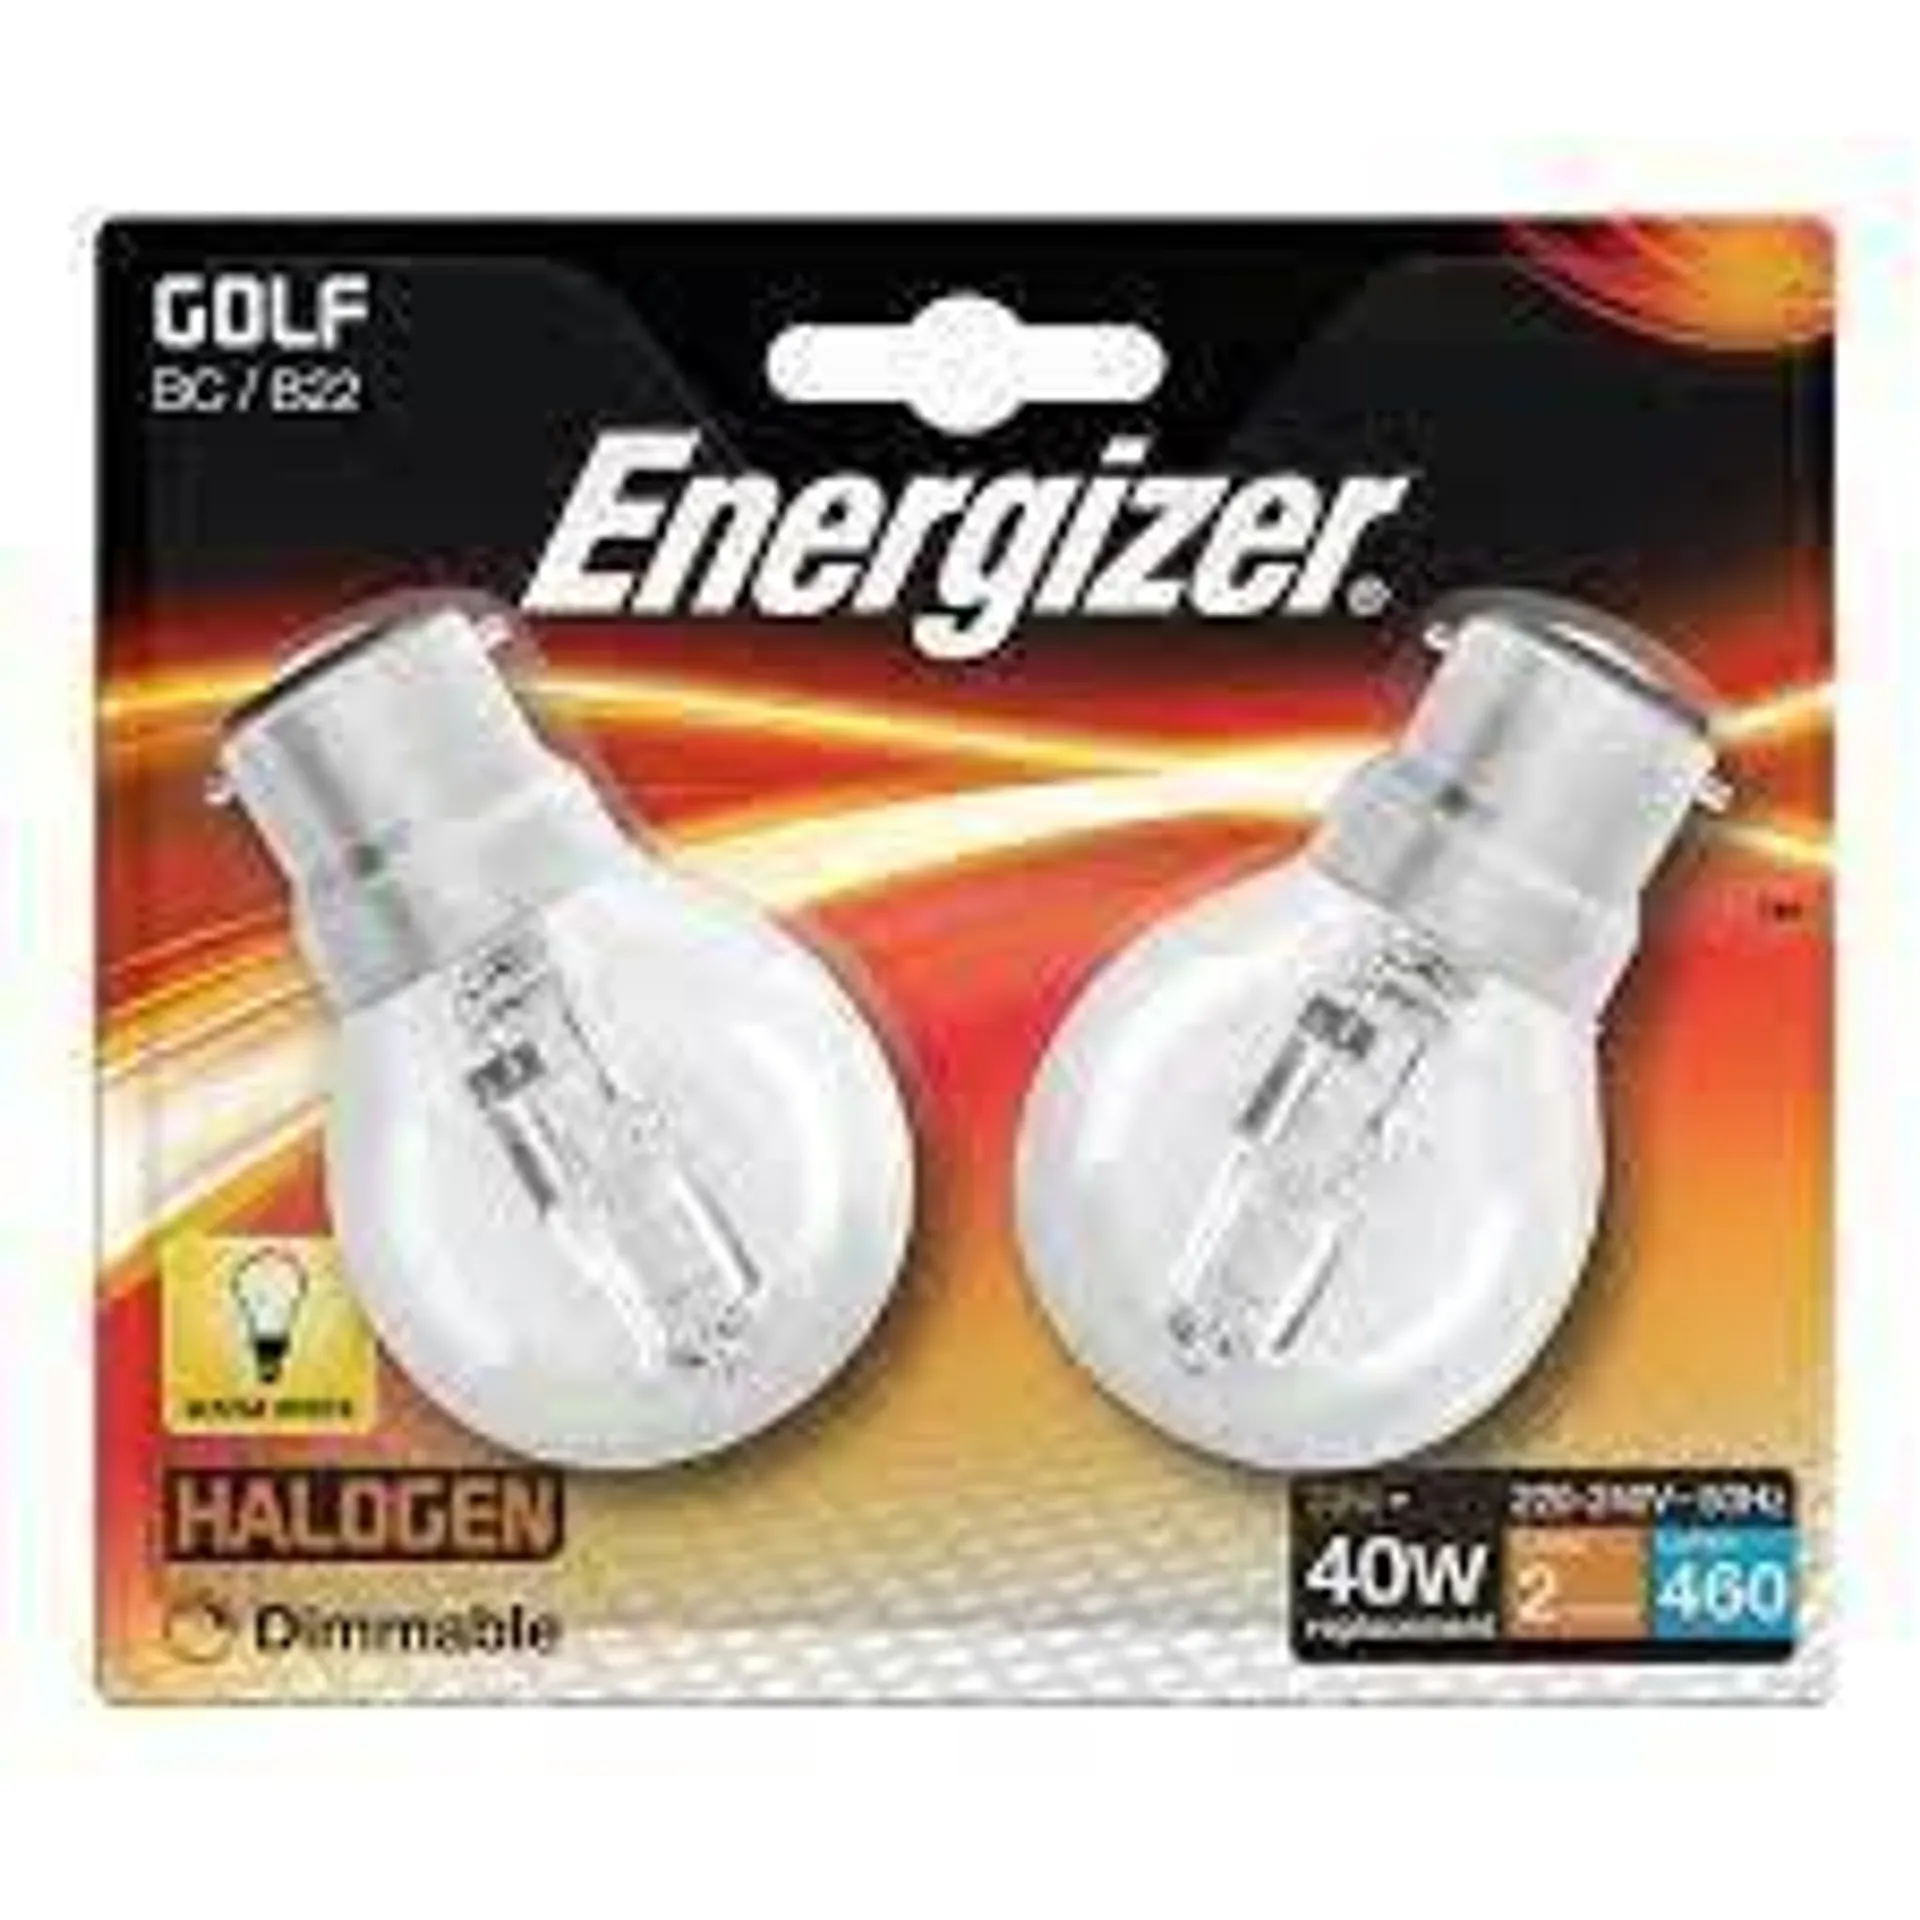 Energizer Halogen Golf Dimmable BC / B22 33w Bulbs